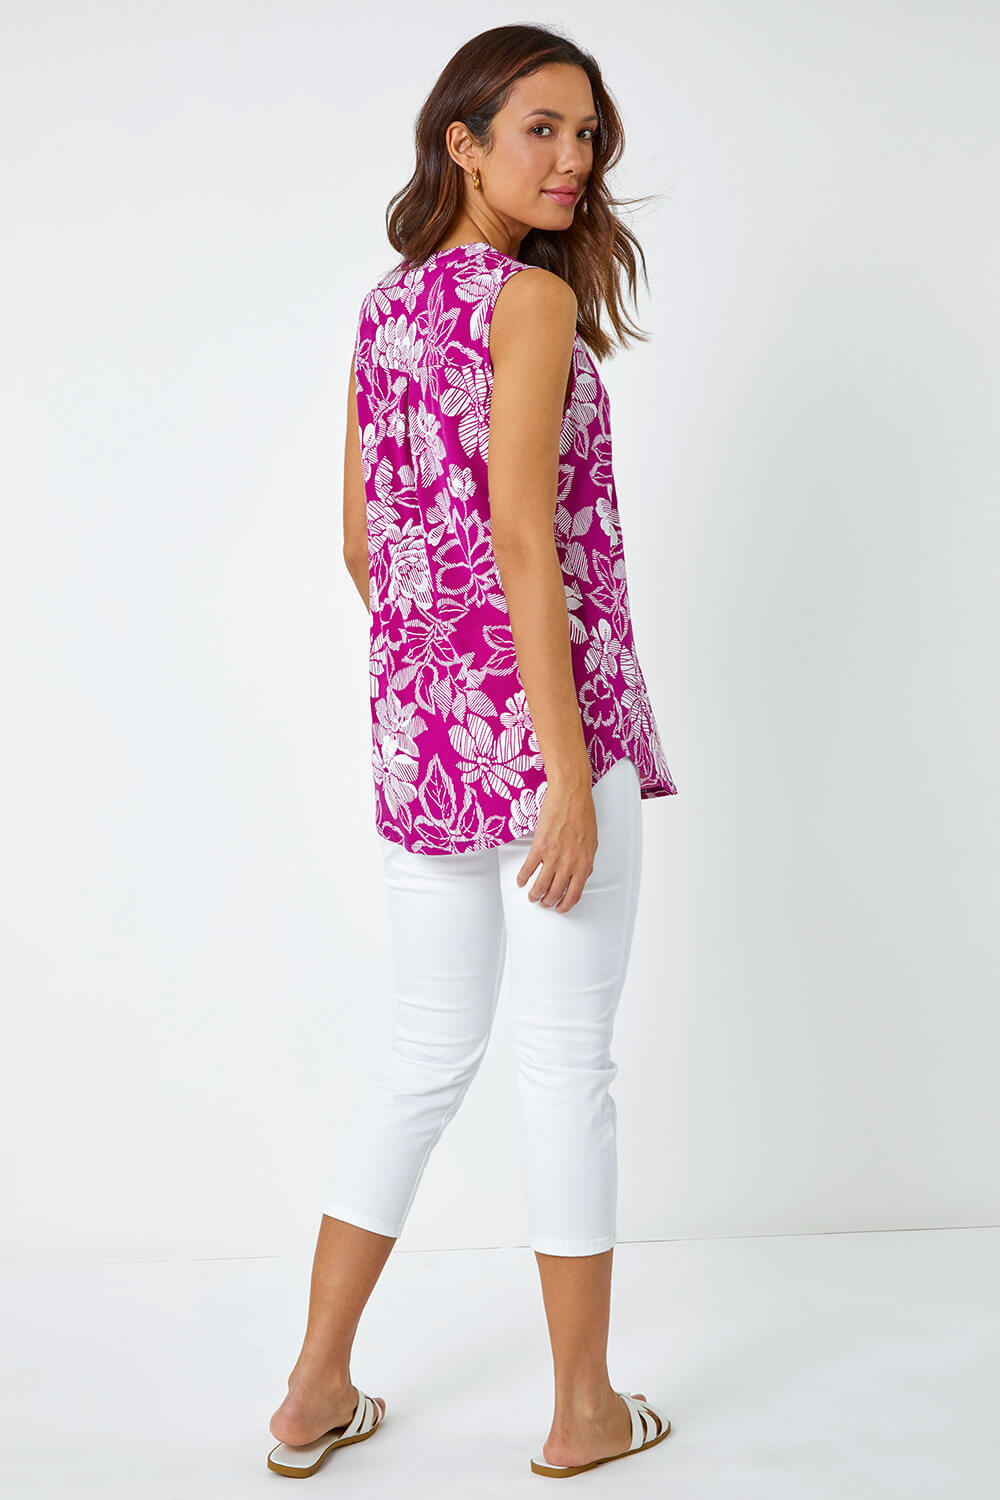 MAGENTA Textured Floral Print Sleeveless Top, Image 3 of 5